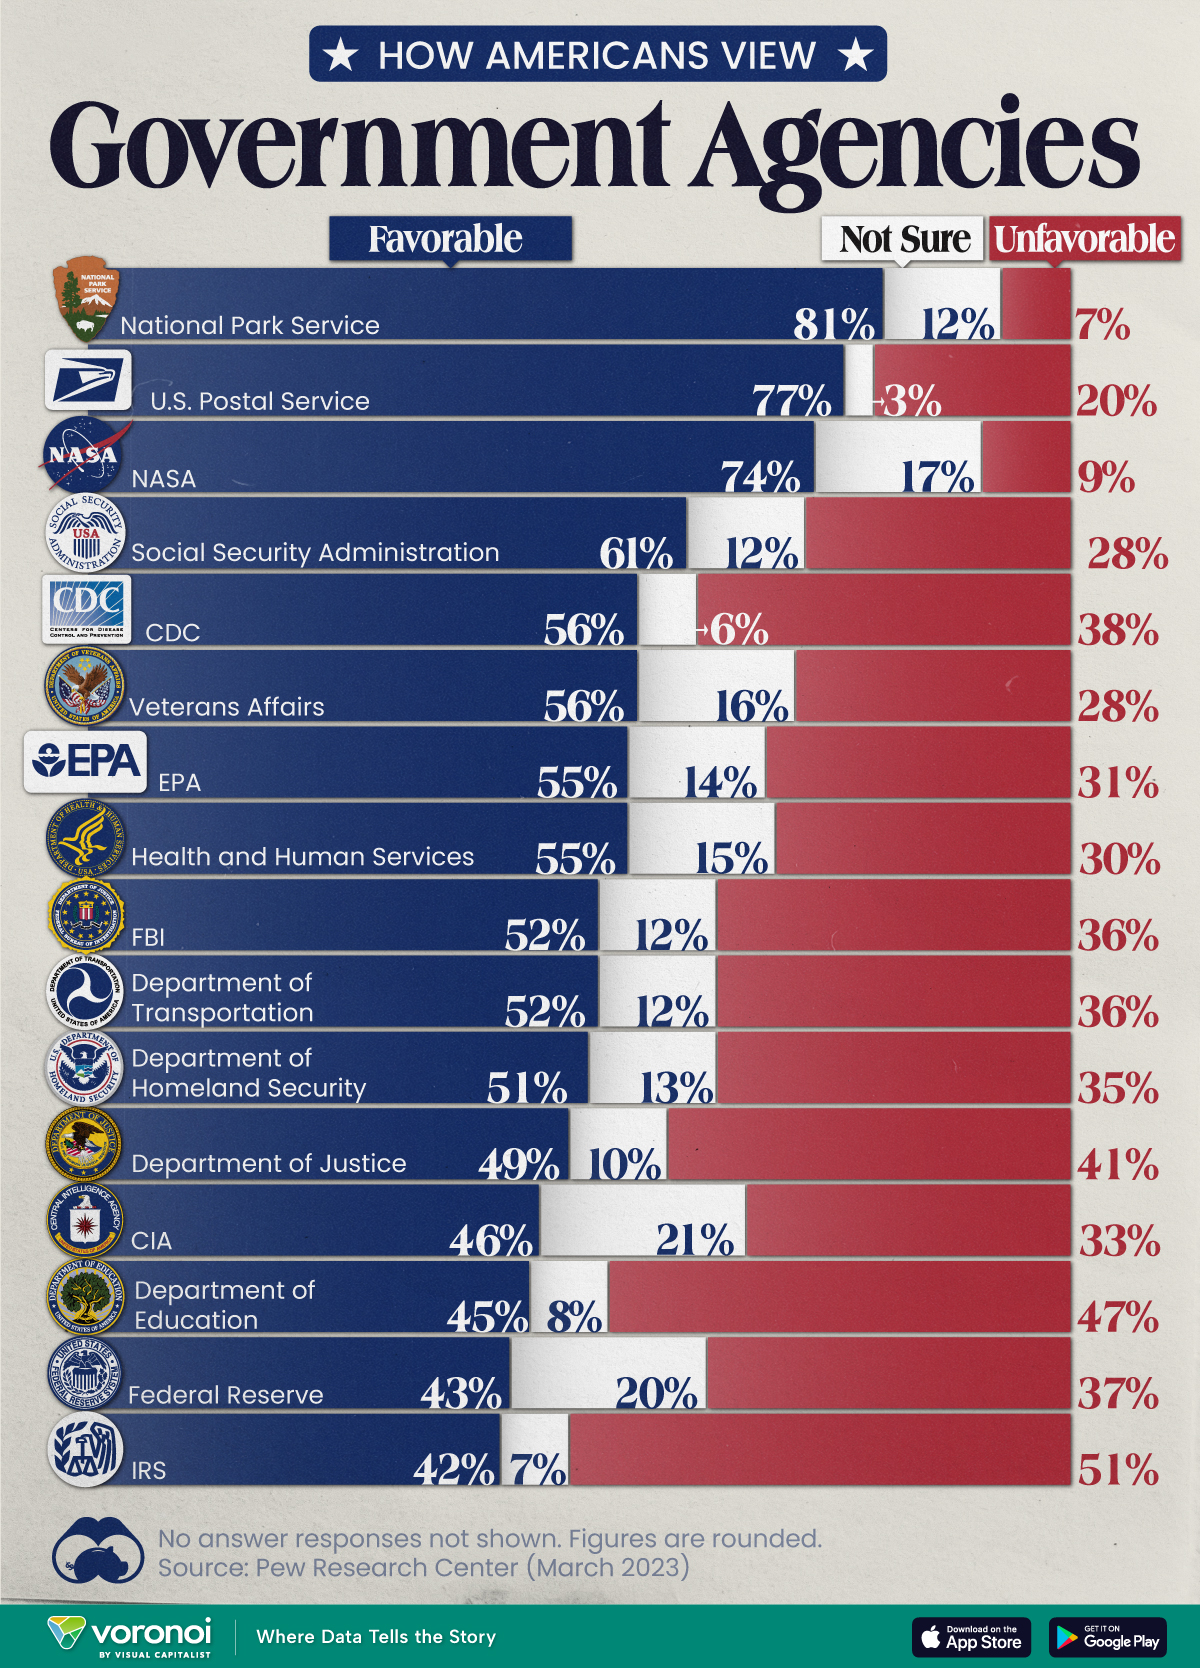 The favorability ratings of 16 federal government agencies based on a March 2023 survey, conducted by Pew Research Center.